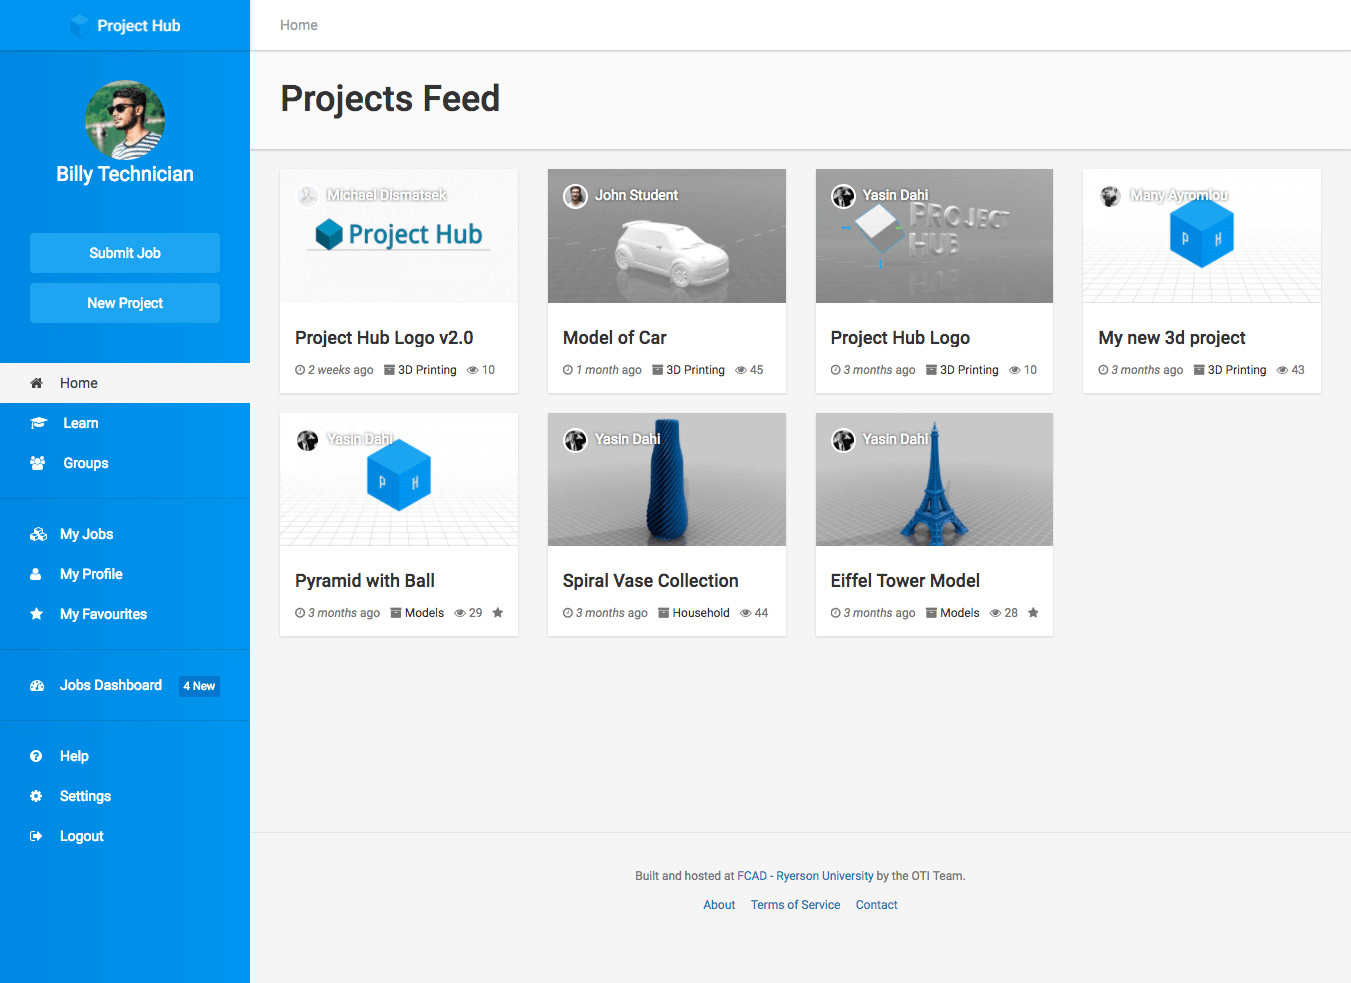 Projects Feed page showing several items shared by users in a card grid layout